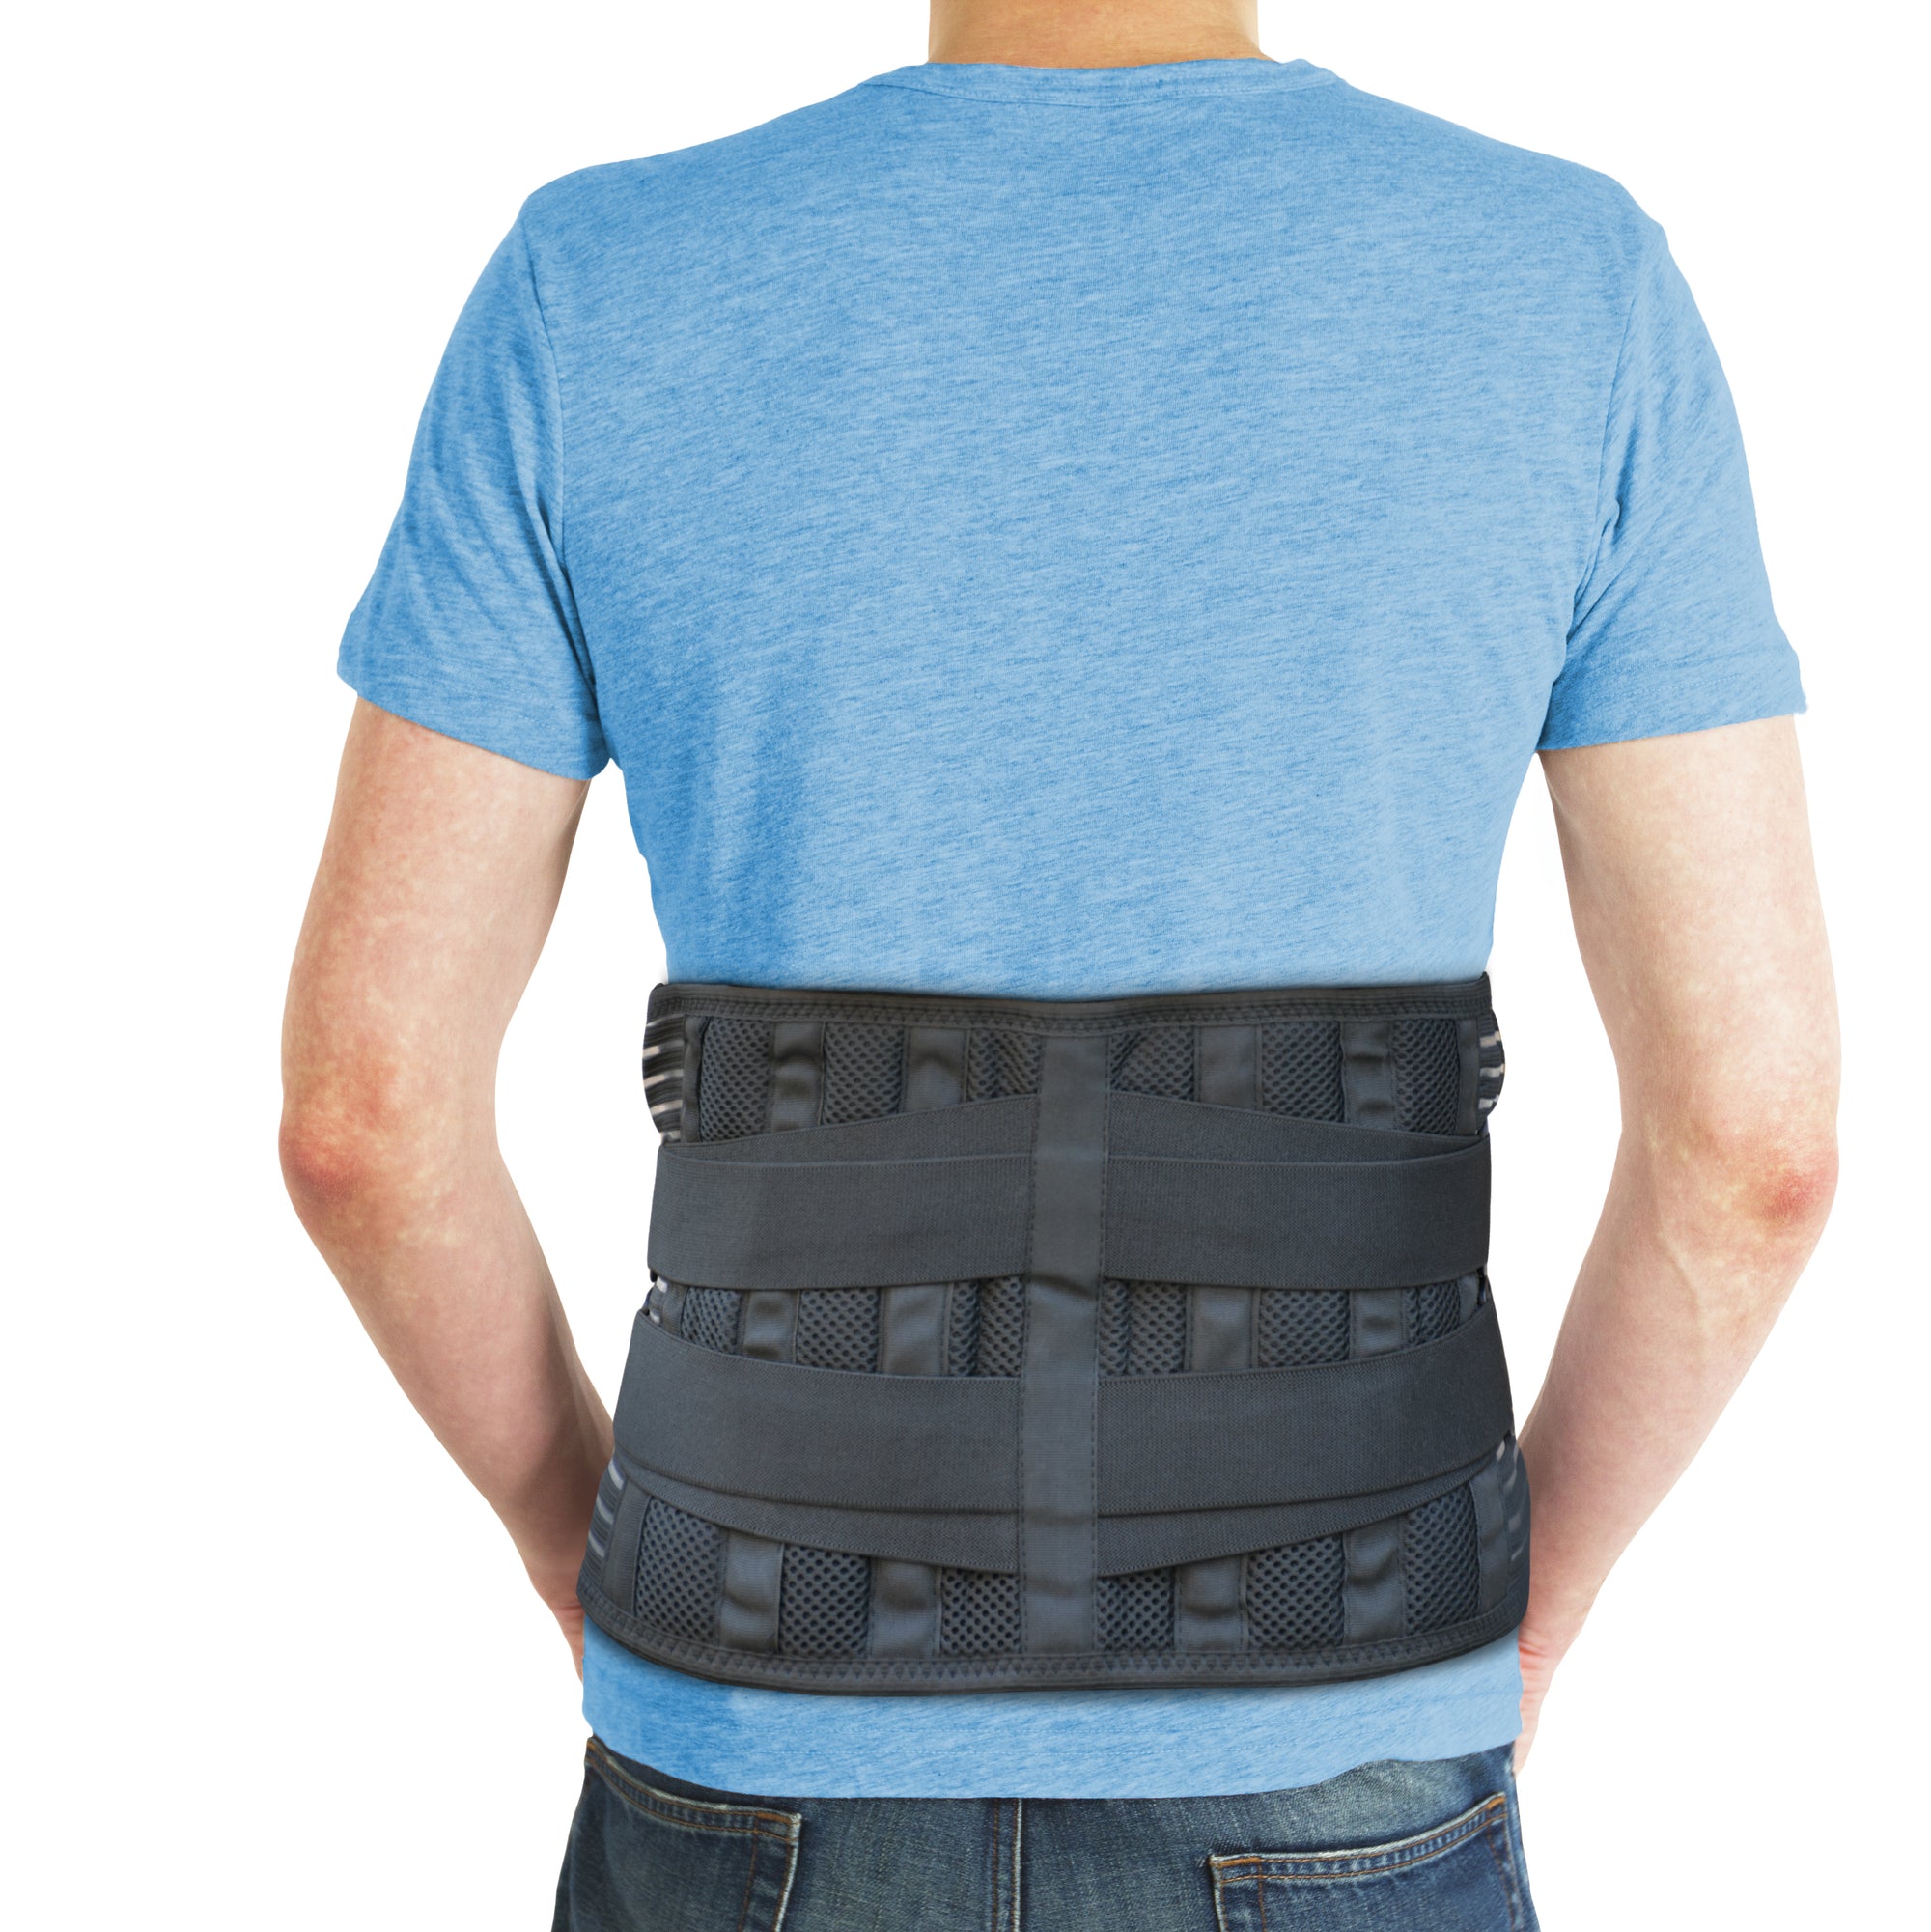 Hernia Belt for Men or Women - With Support Straps and Pressure